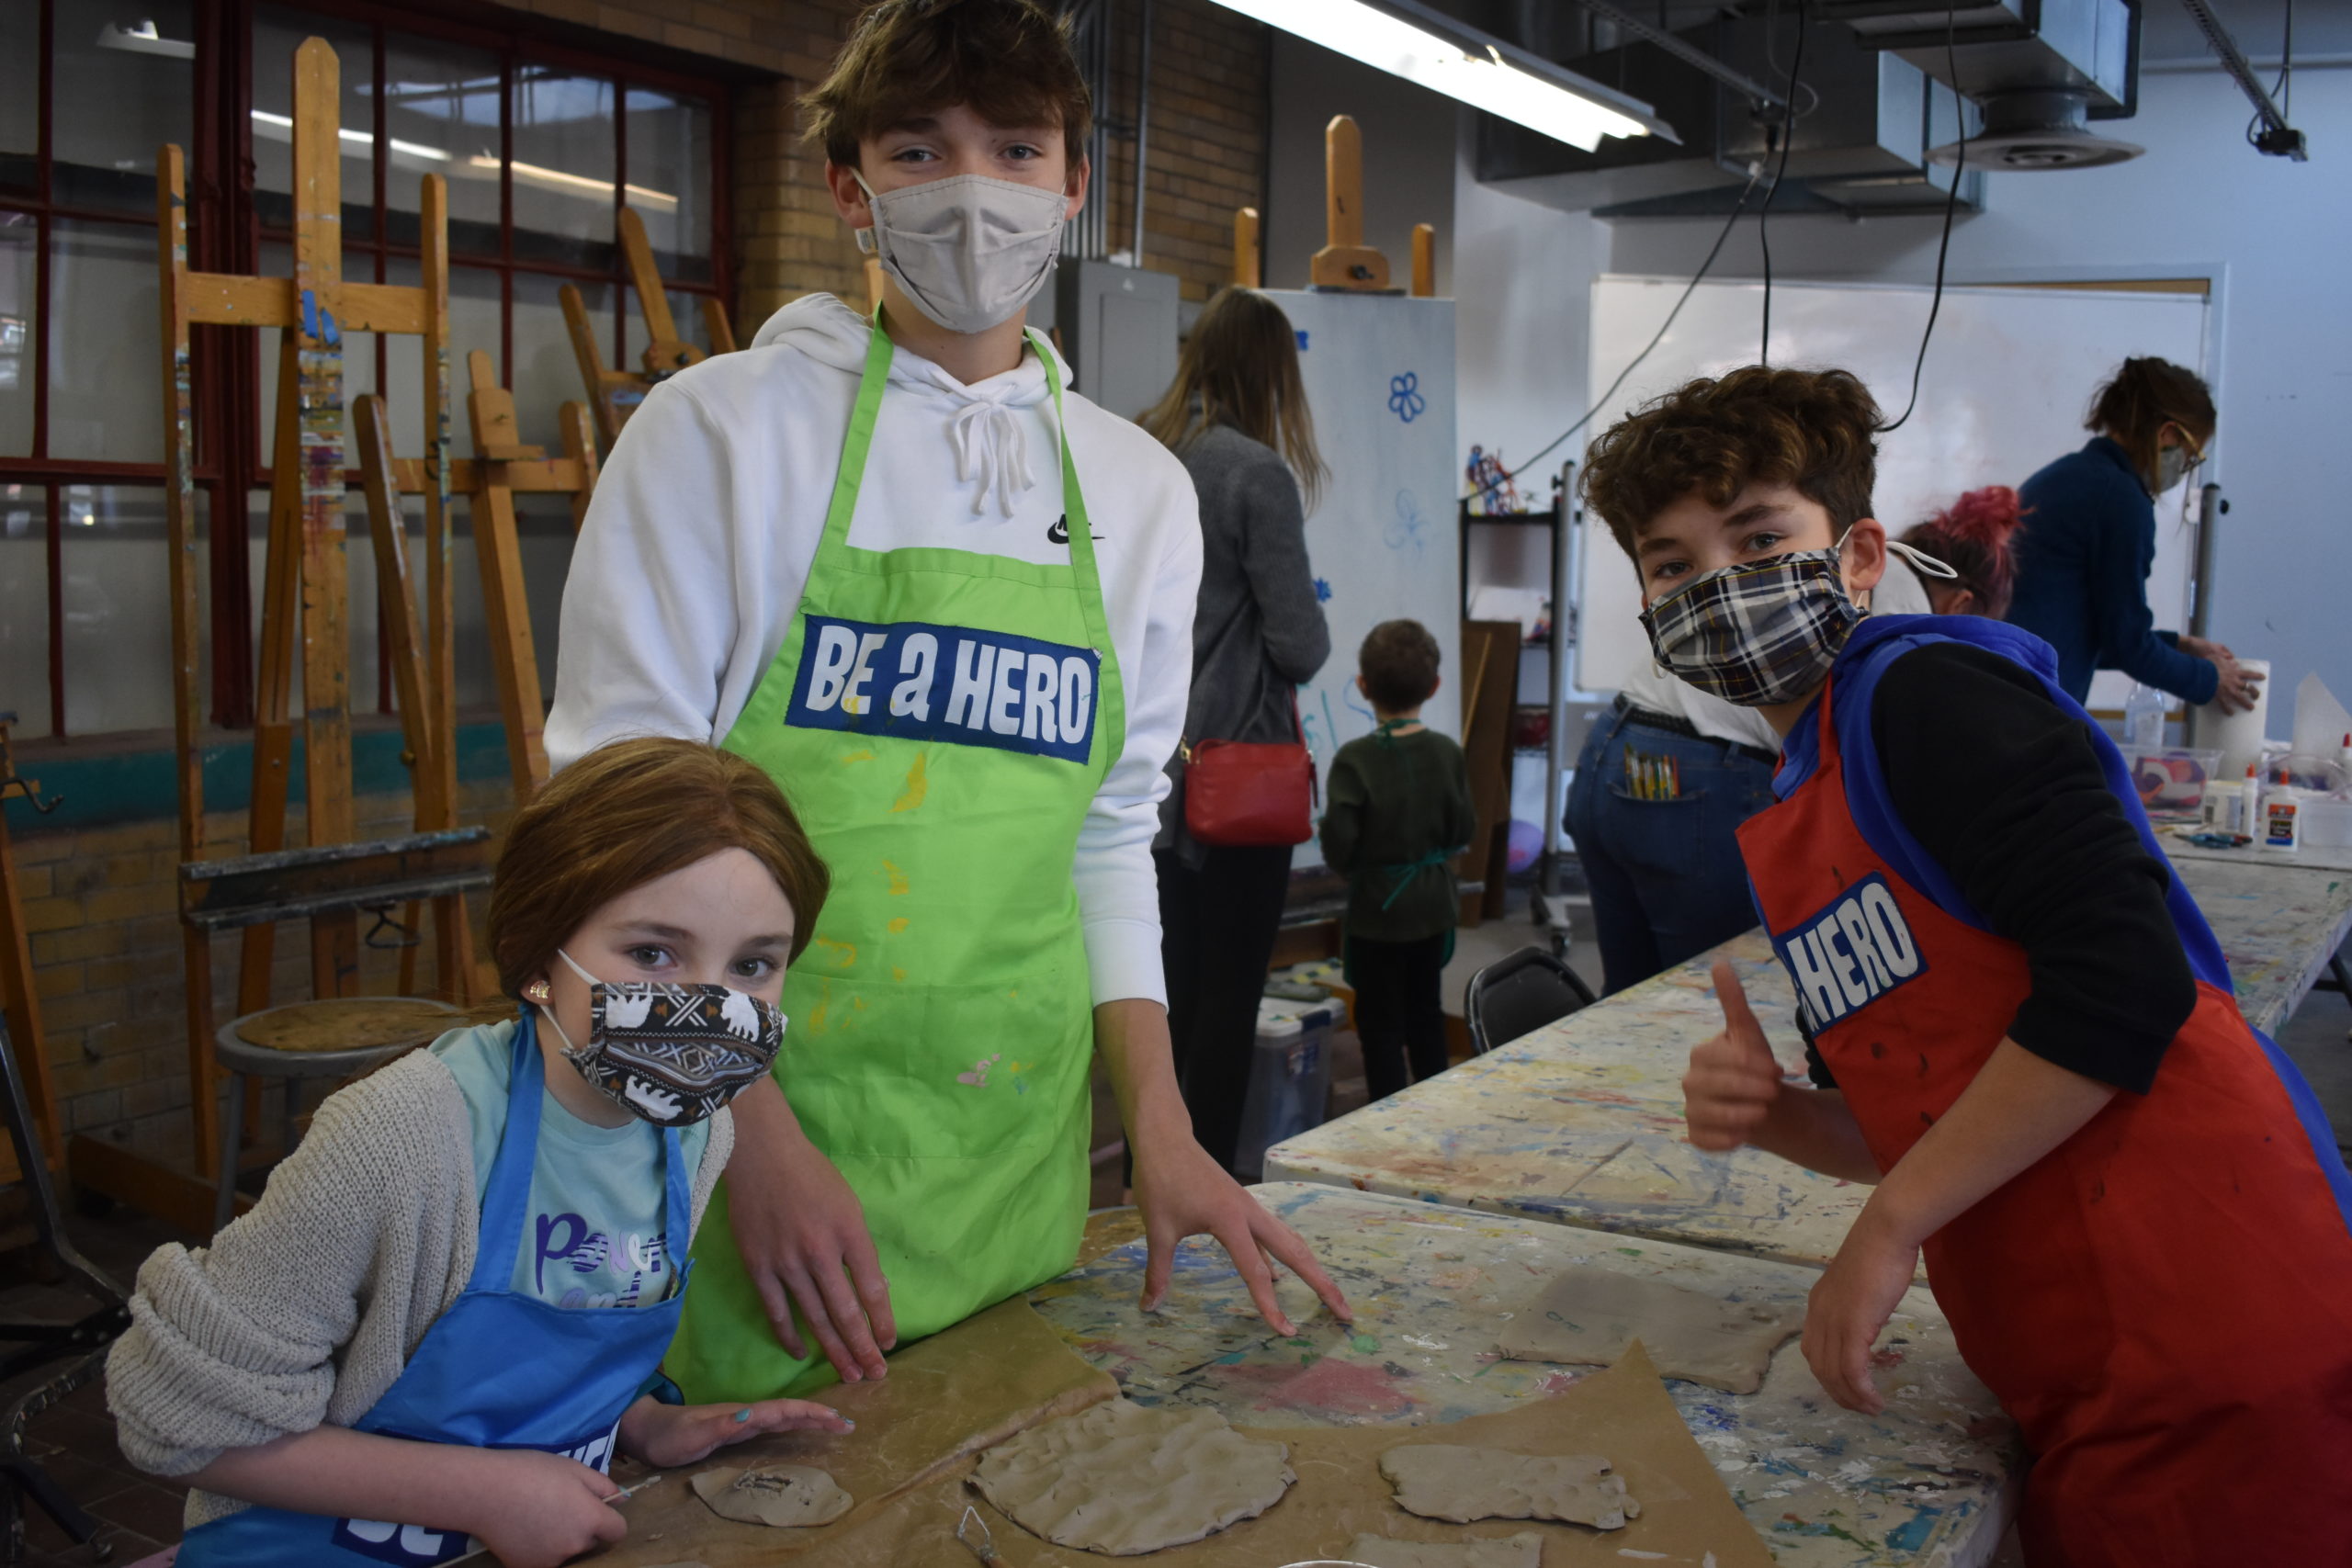 Children in an art studio working on a craft together